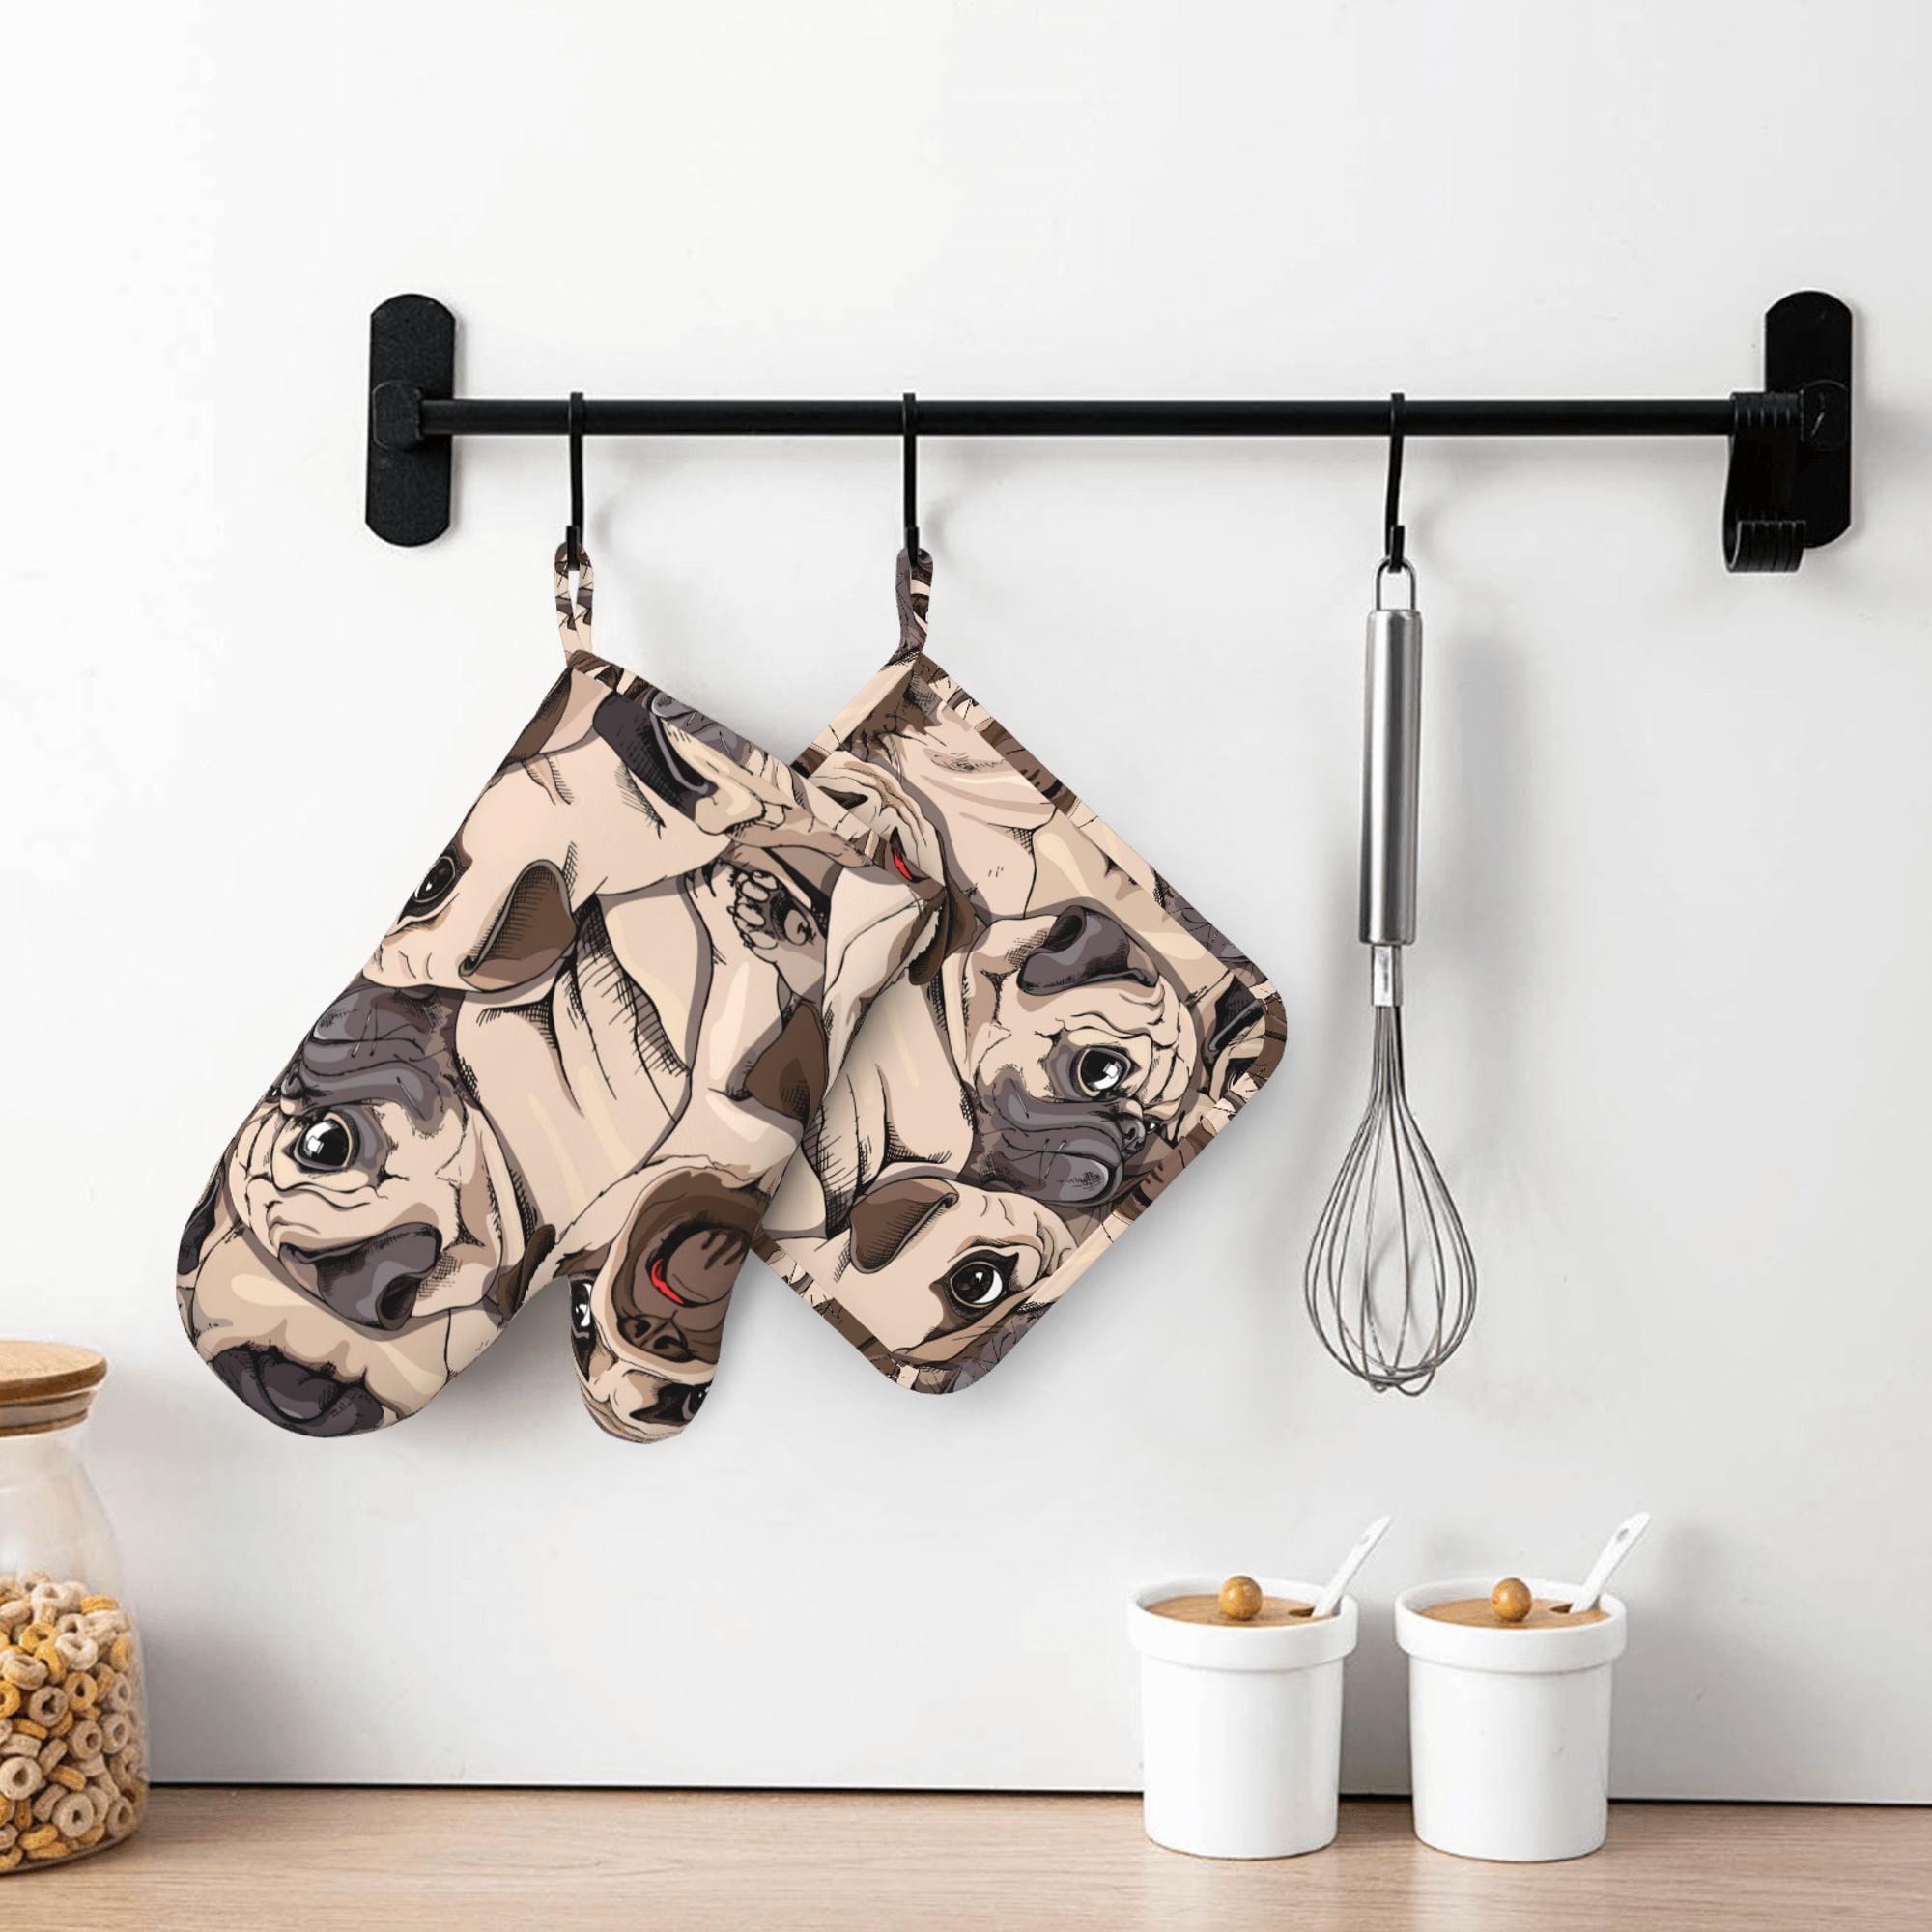 Hanging Oven Glove and Pot-holder Against Wall with Tile Stock